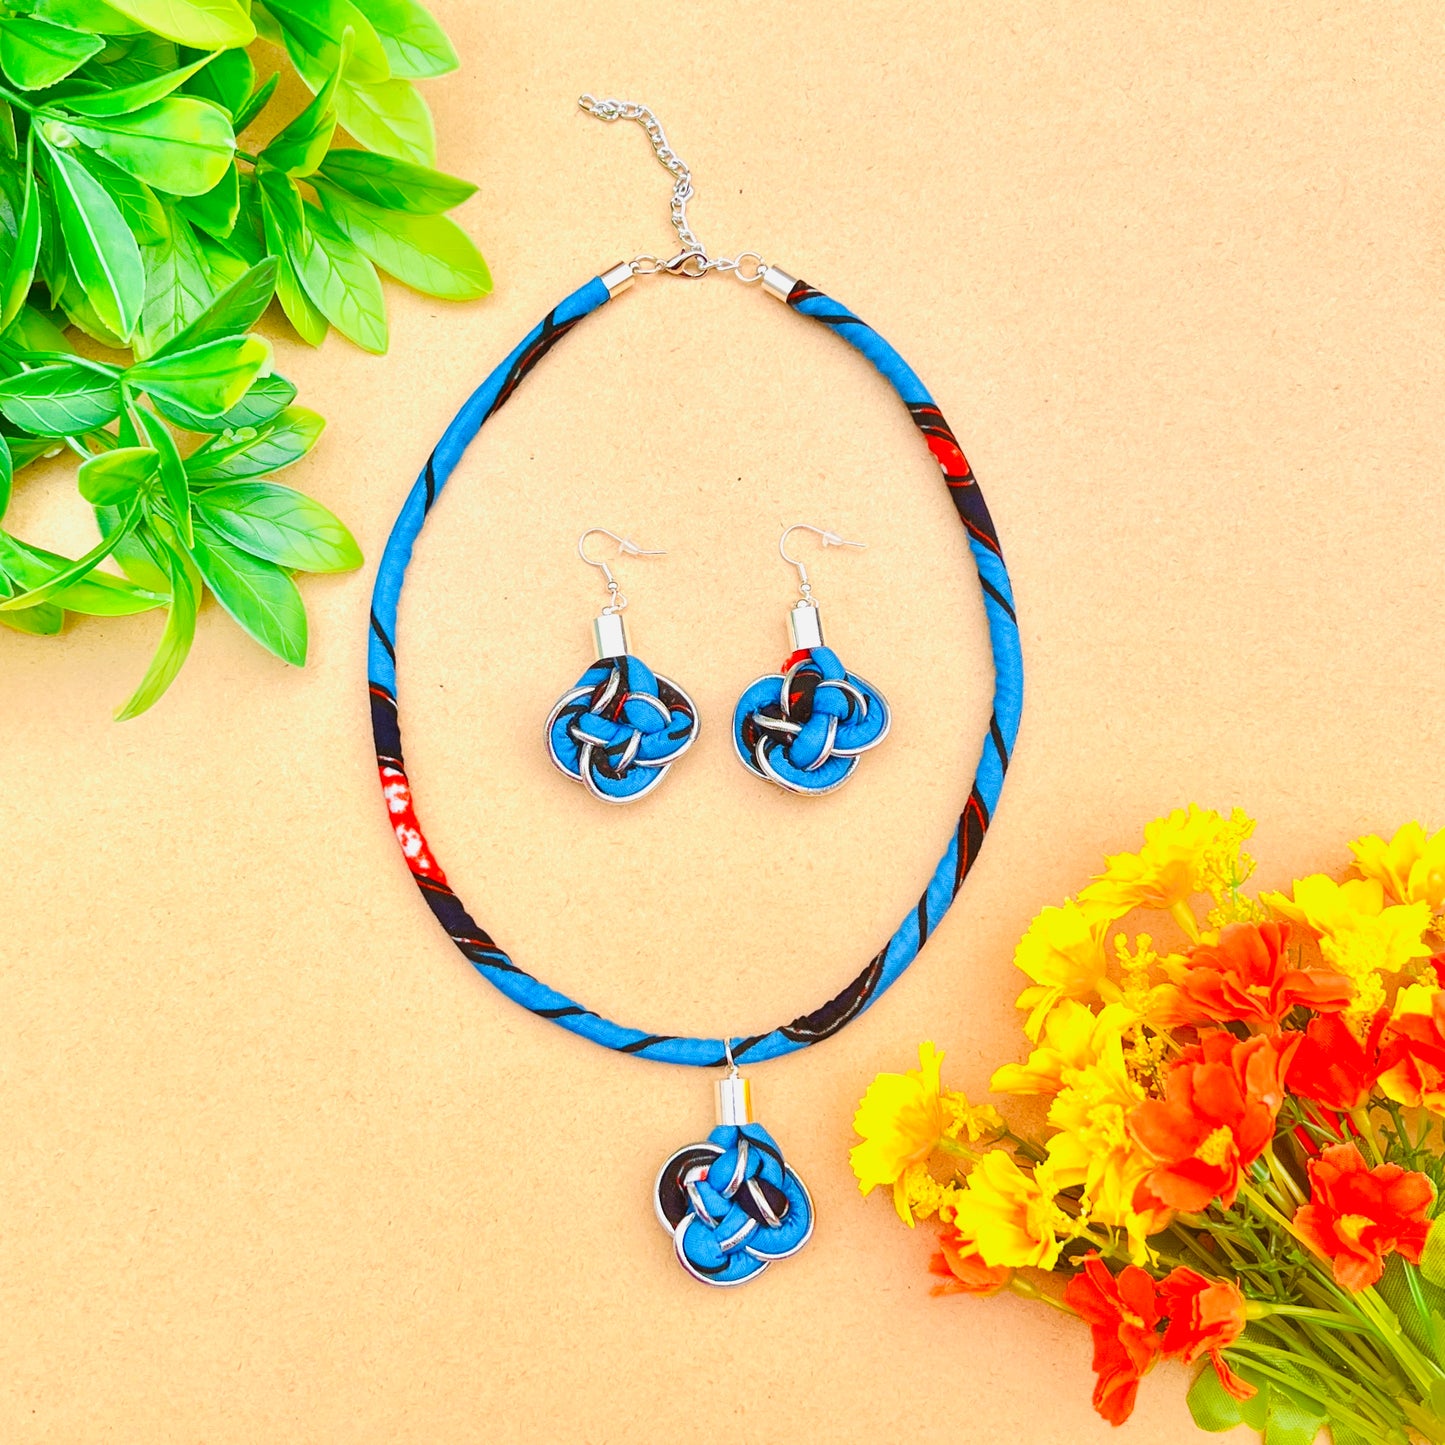 Blue and silver African print knotted necklace and earrings set